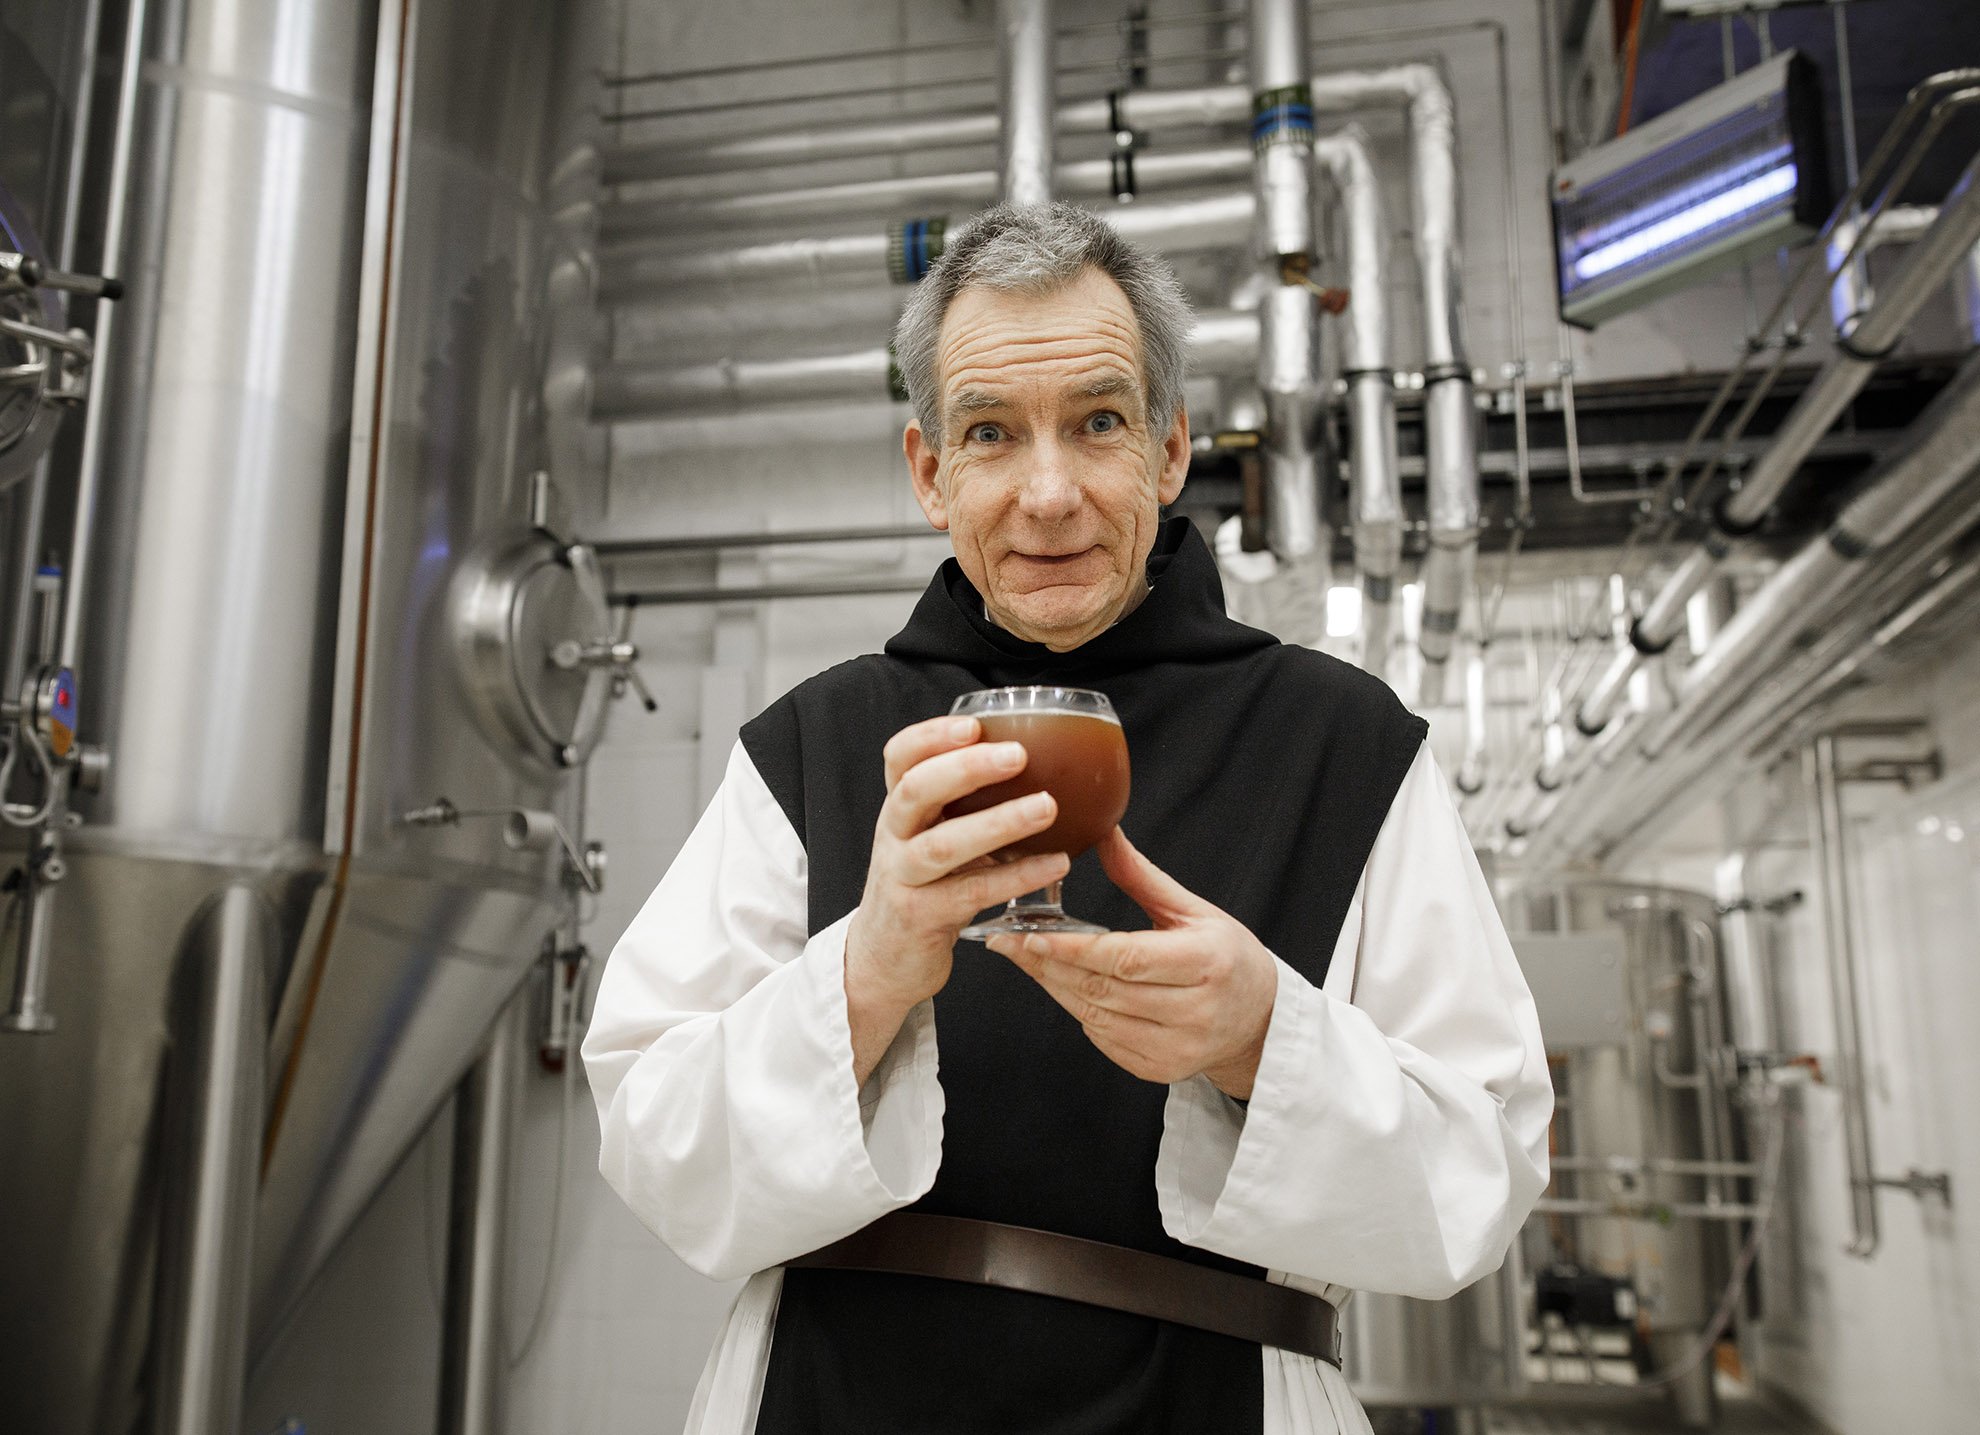  Father Joseph in the brewery at Mount St Bernard abbey. The monks make Tynt Meadow, an award-winning beer. 